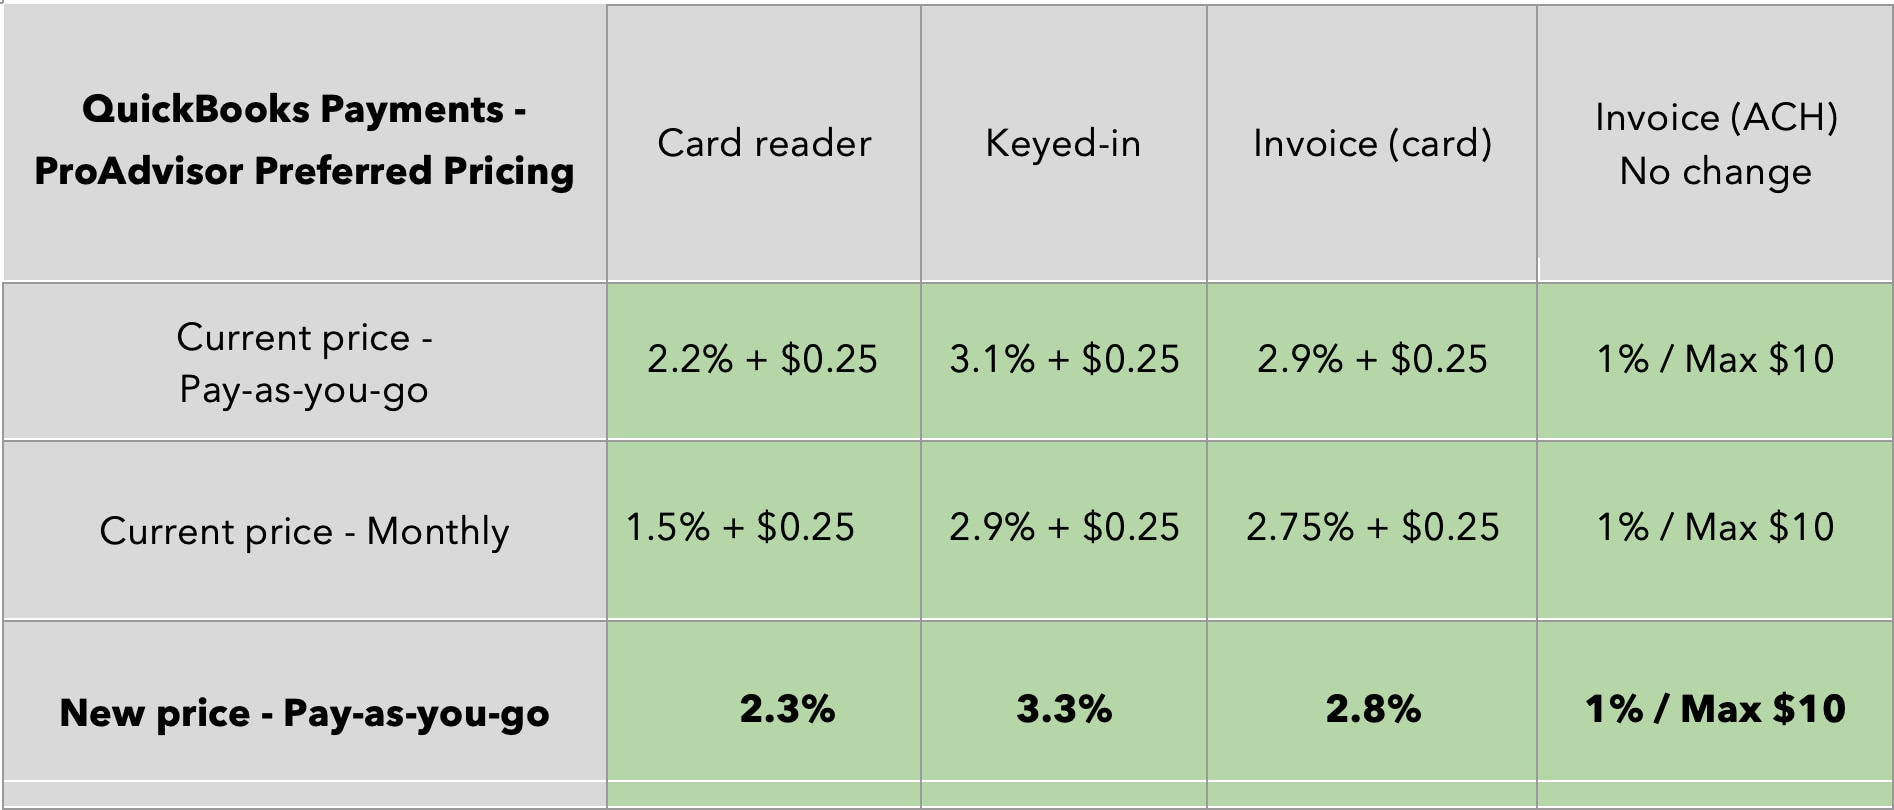 Pricing for QuickBooks Payments